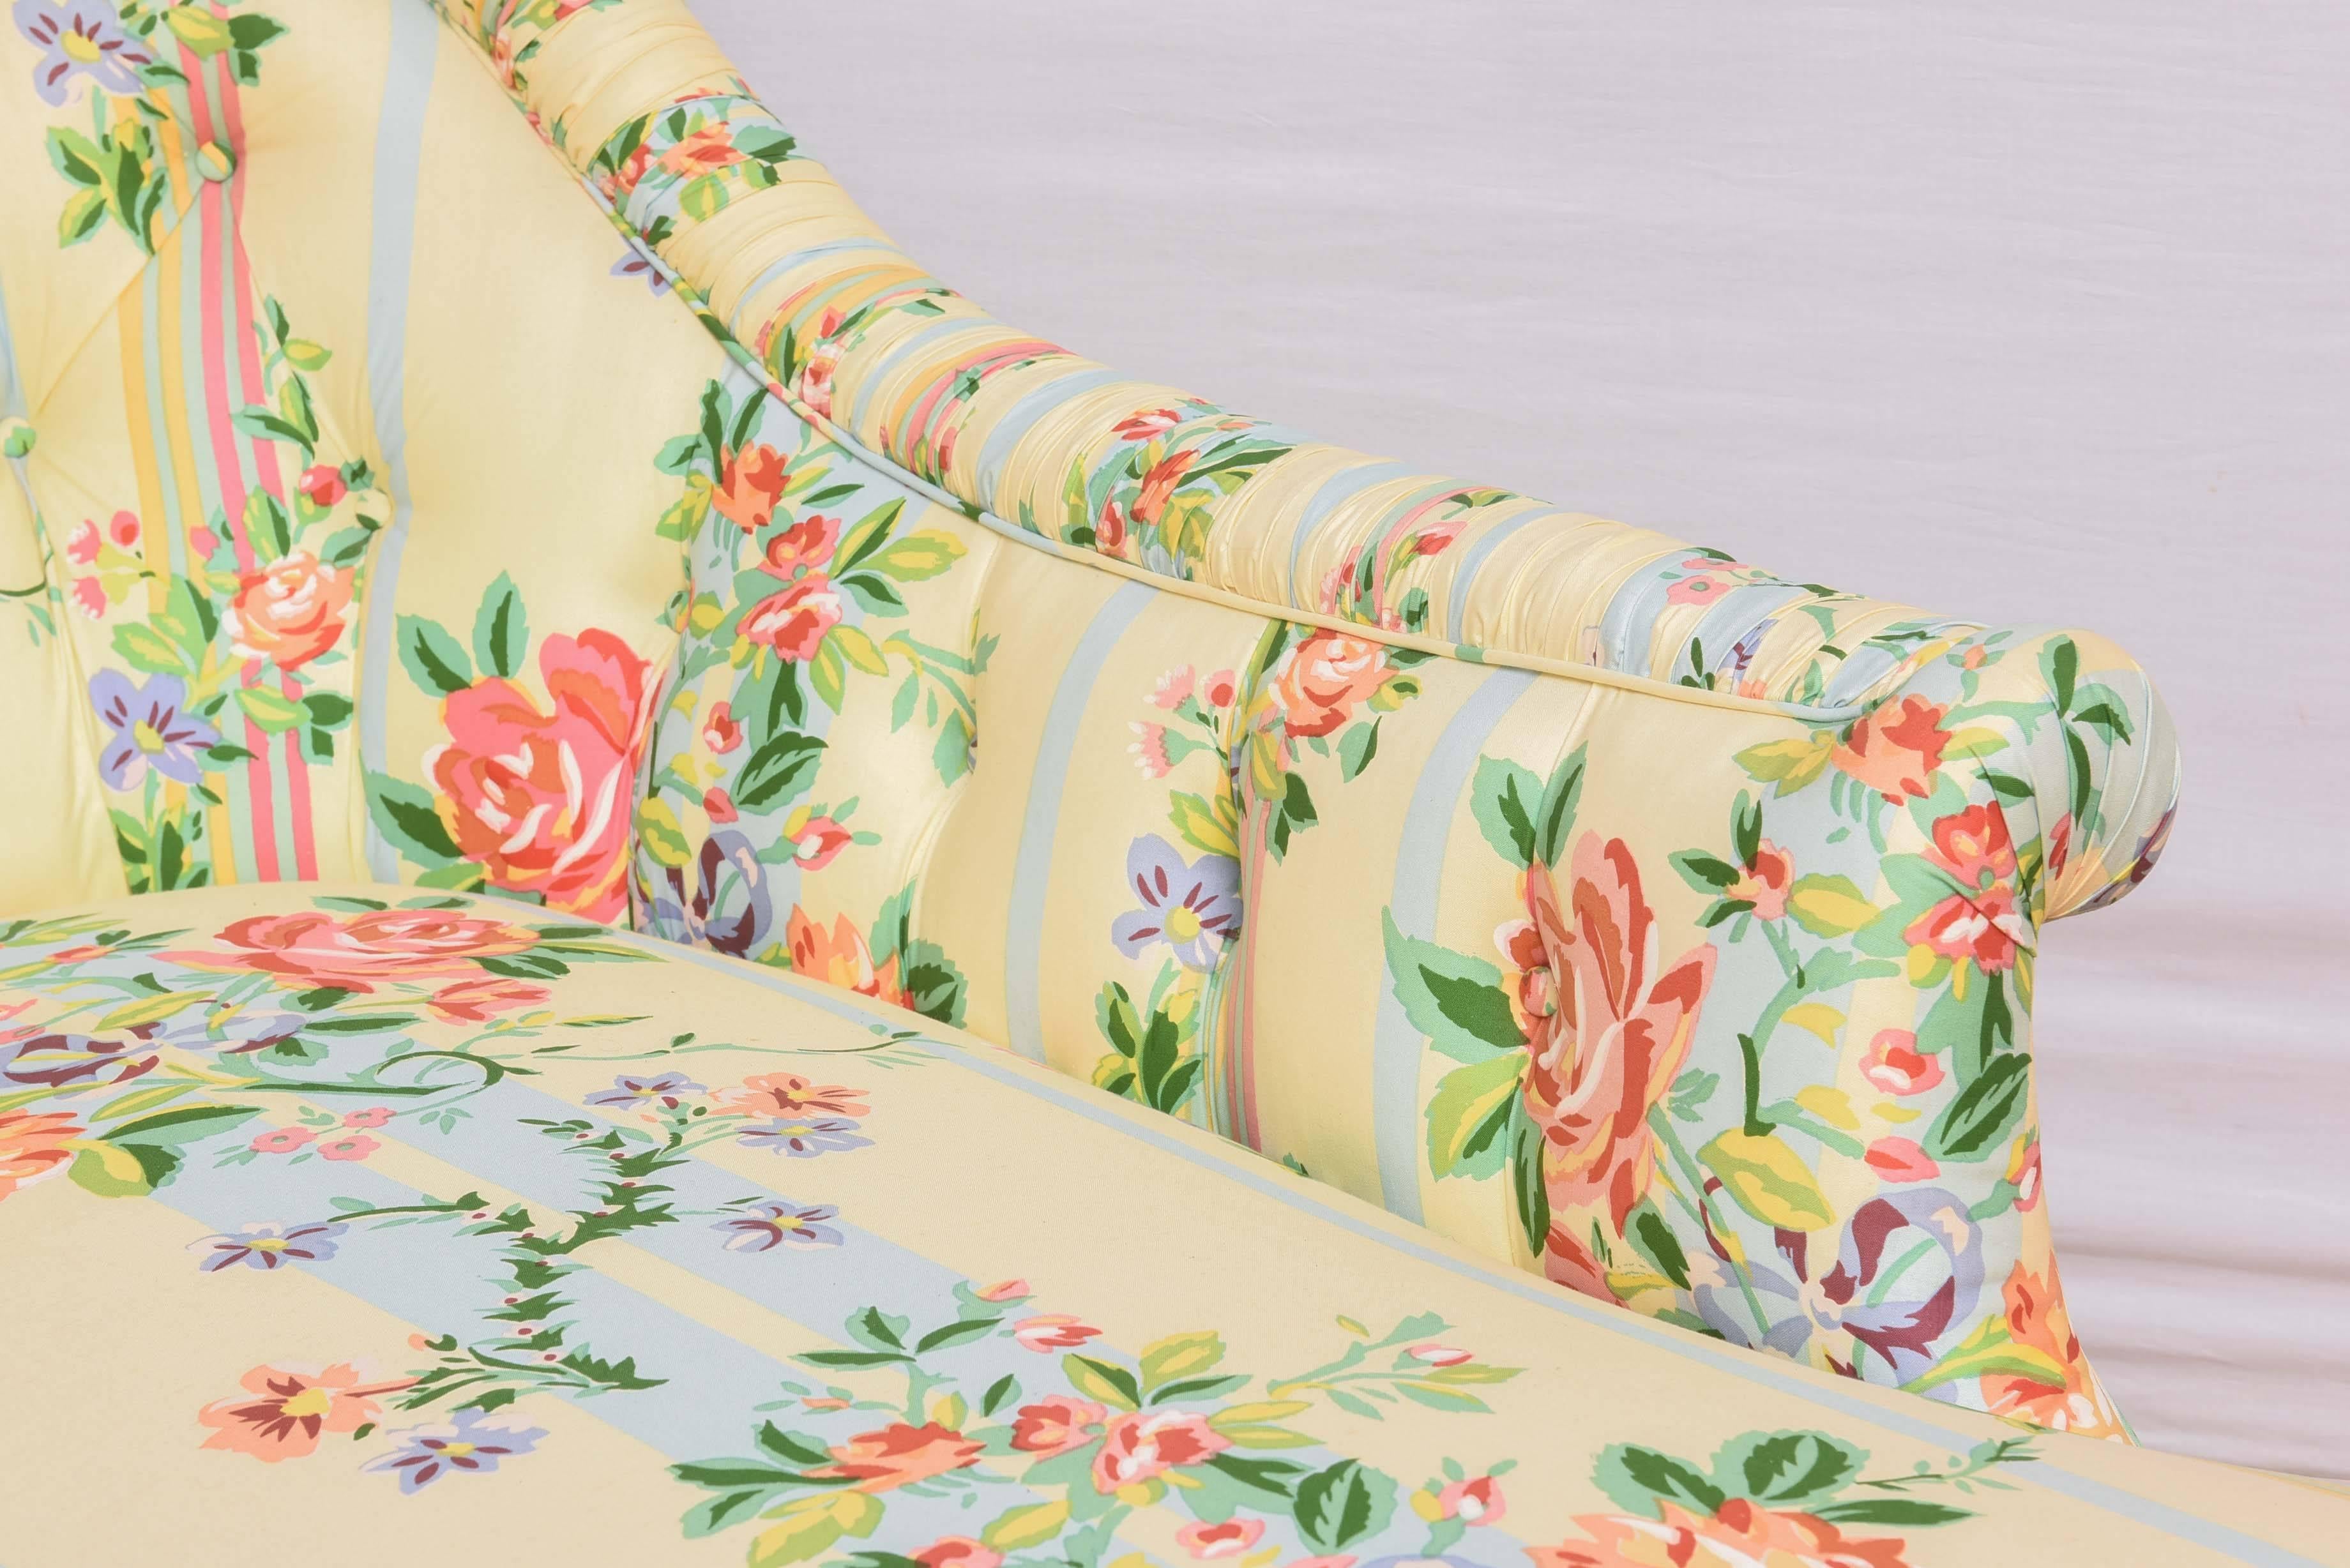 Fine 1940s chaise Lounge  with floral pattern fabric in great shape.